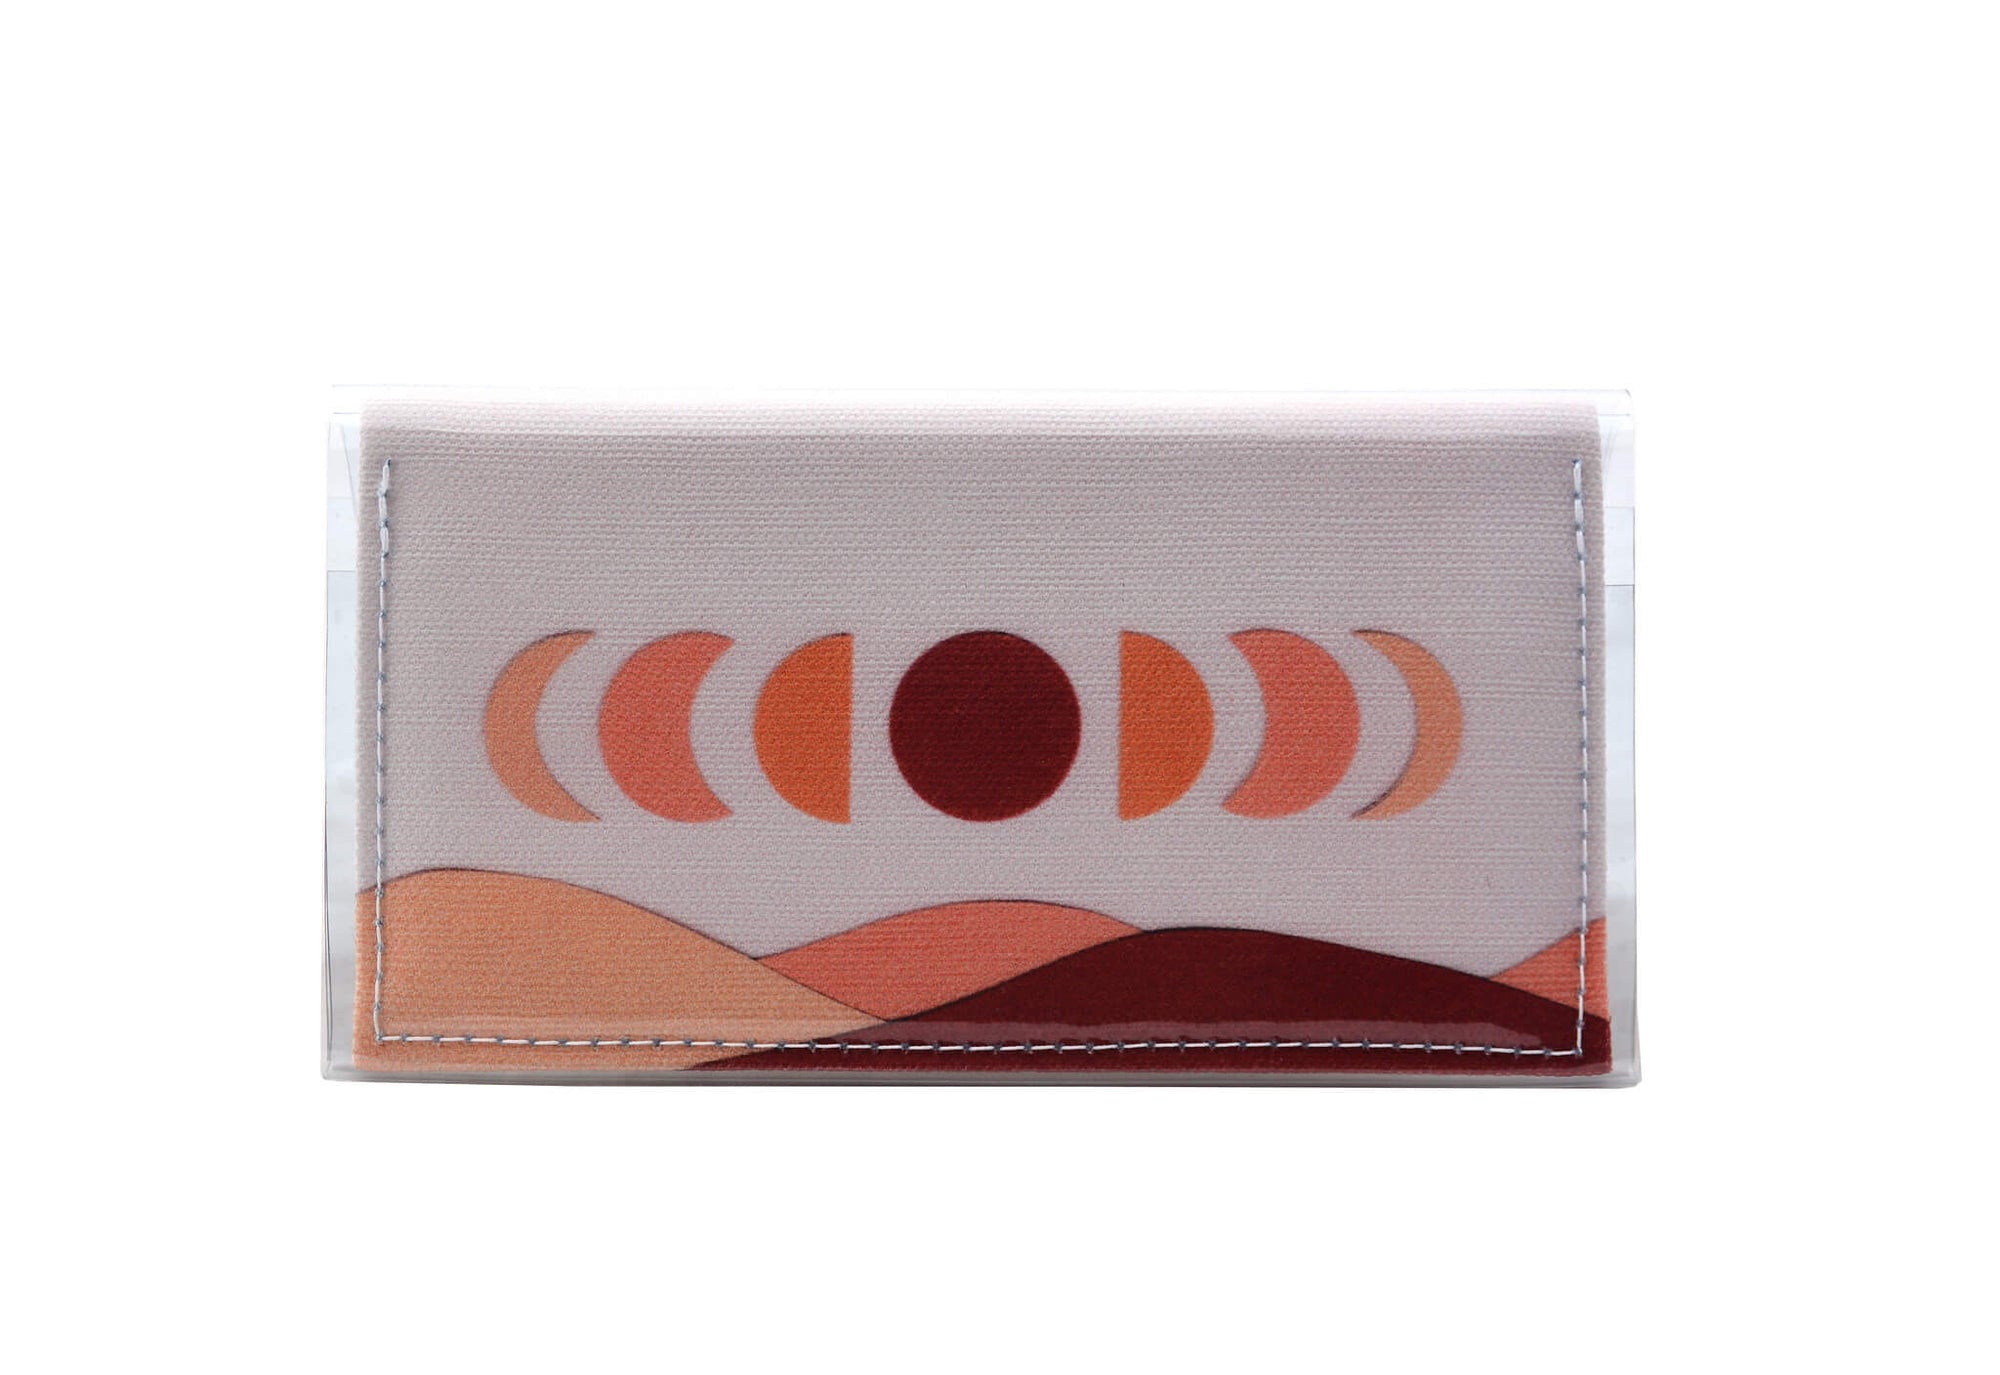 This is an image of the rear of a Kitty Came Home bifold mini purse clutch in 'The same moon shines' design by Satin and Tat. The moon appears in all its phases in a white sky above a landscape lit by the moon's colours: burgundy, oranges and apricot. This is the small size.